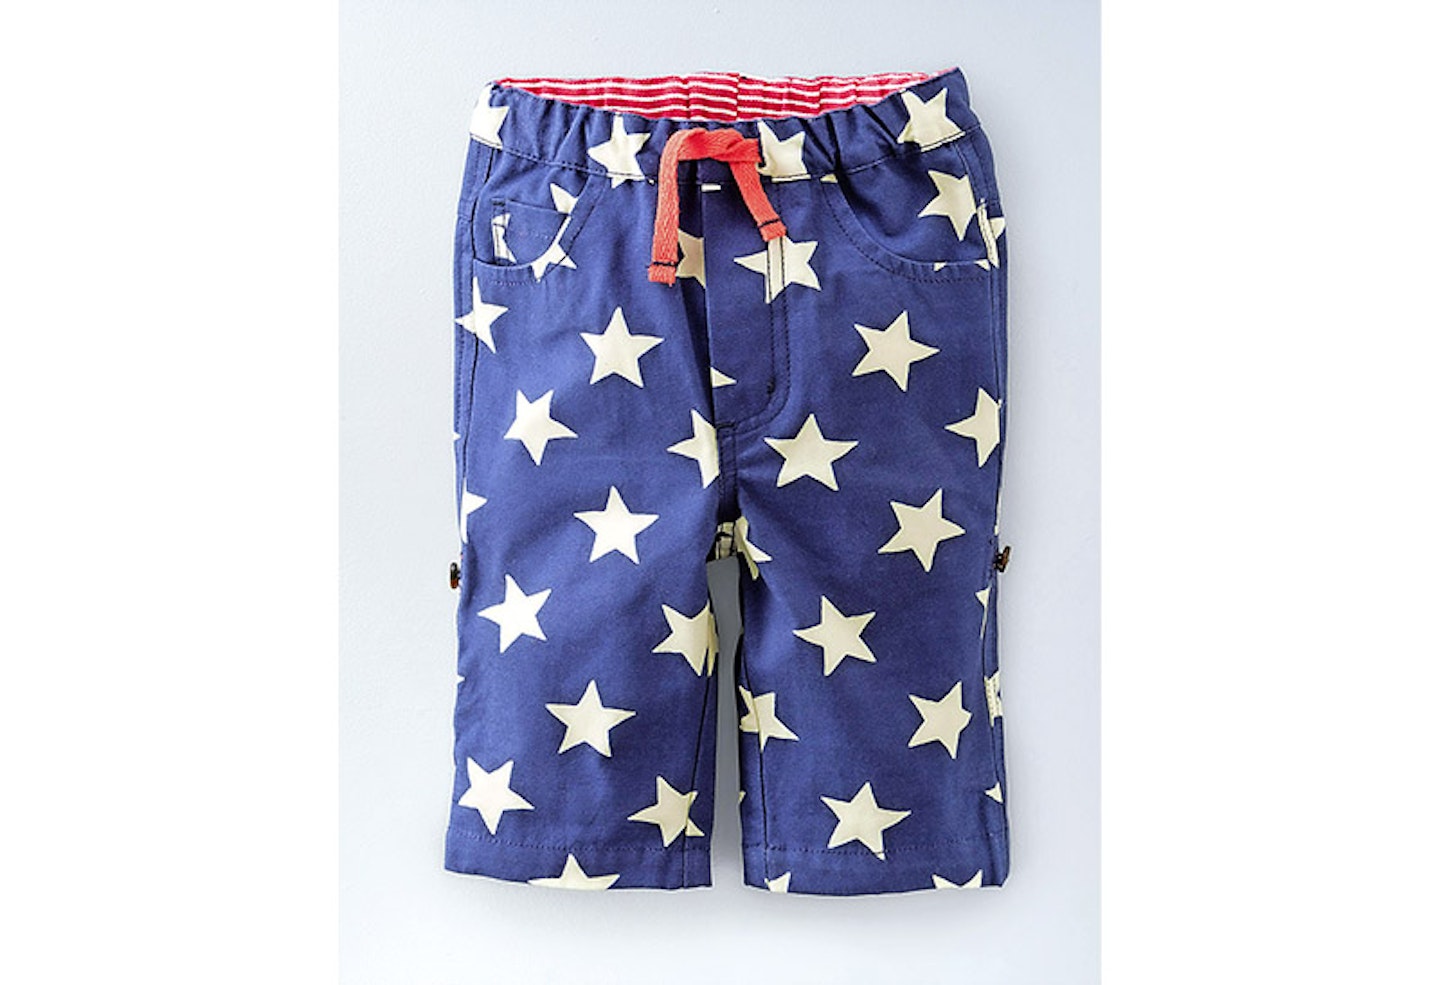 Star trousers (you can roll them up into shorts, too), &pound;17.50,&nbsp;boden.co.uk